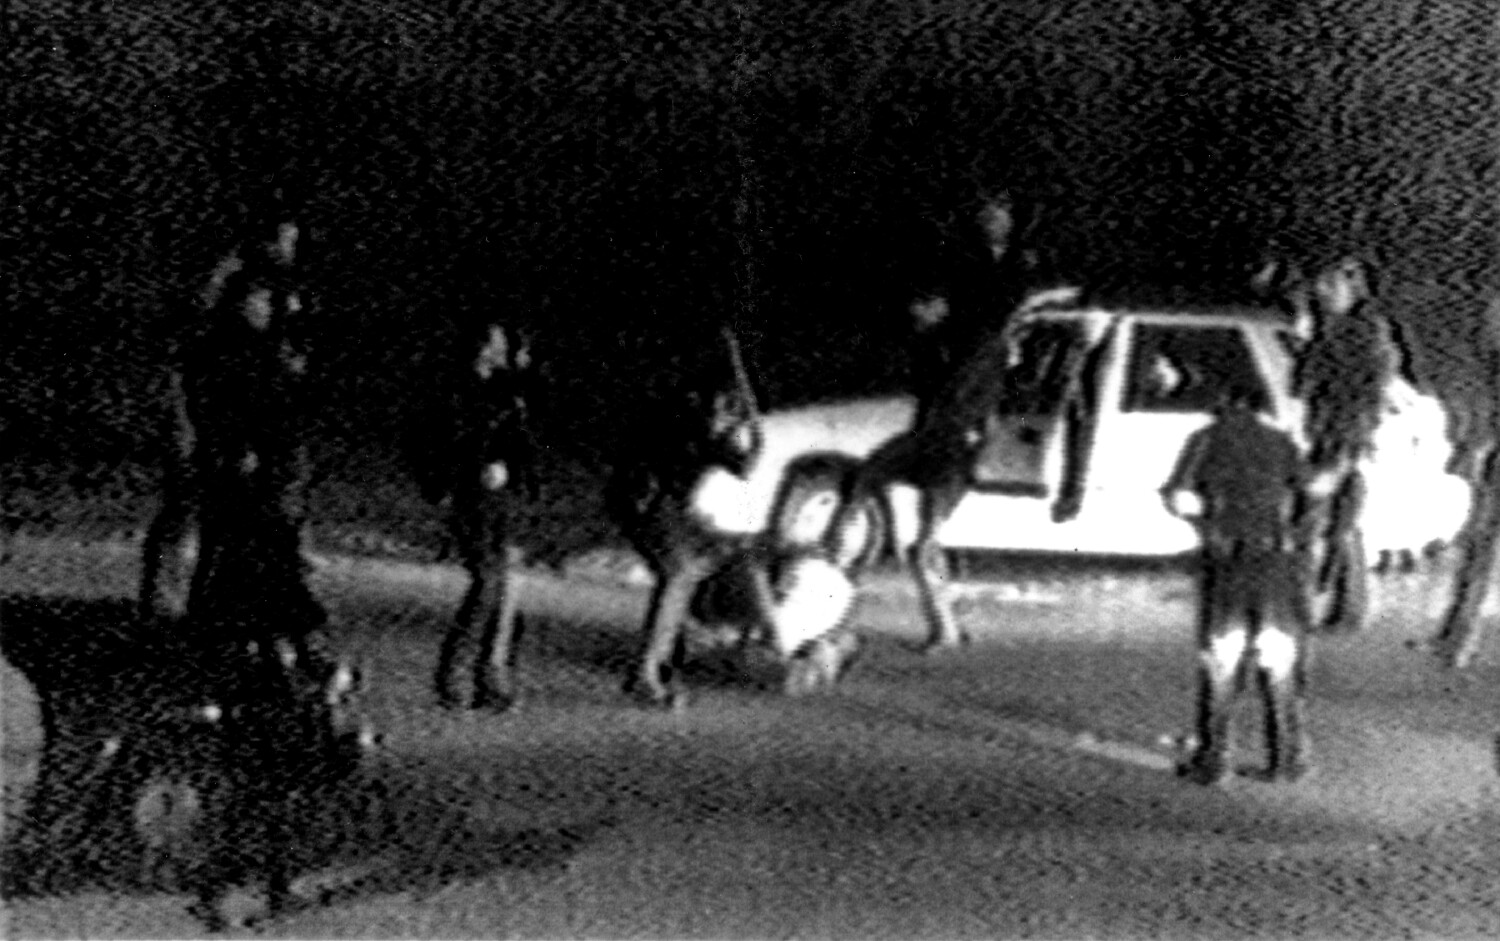 George Holliday, man who filmed Rodney King video that forever changed L.A., dies